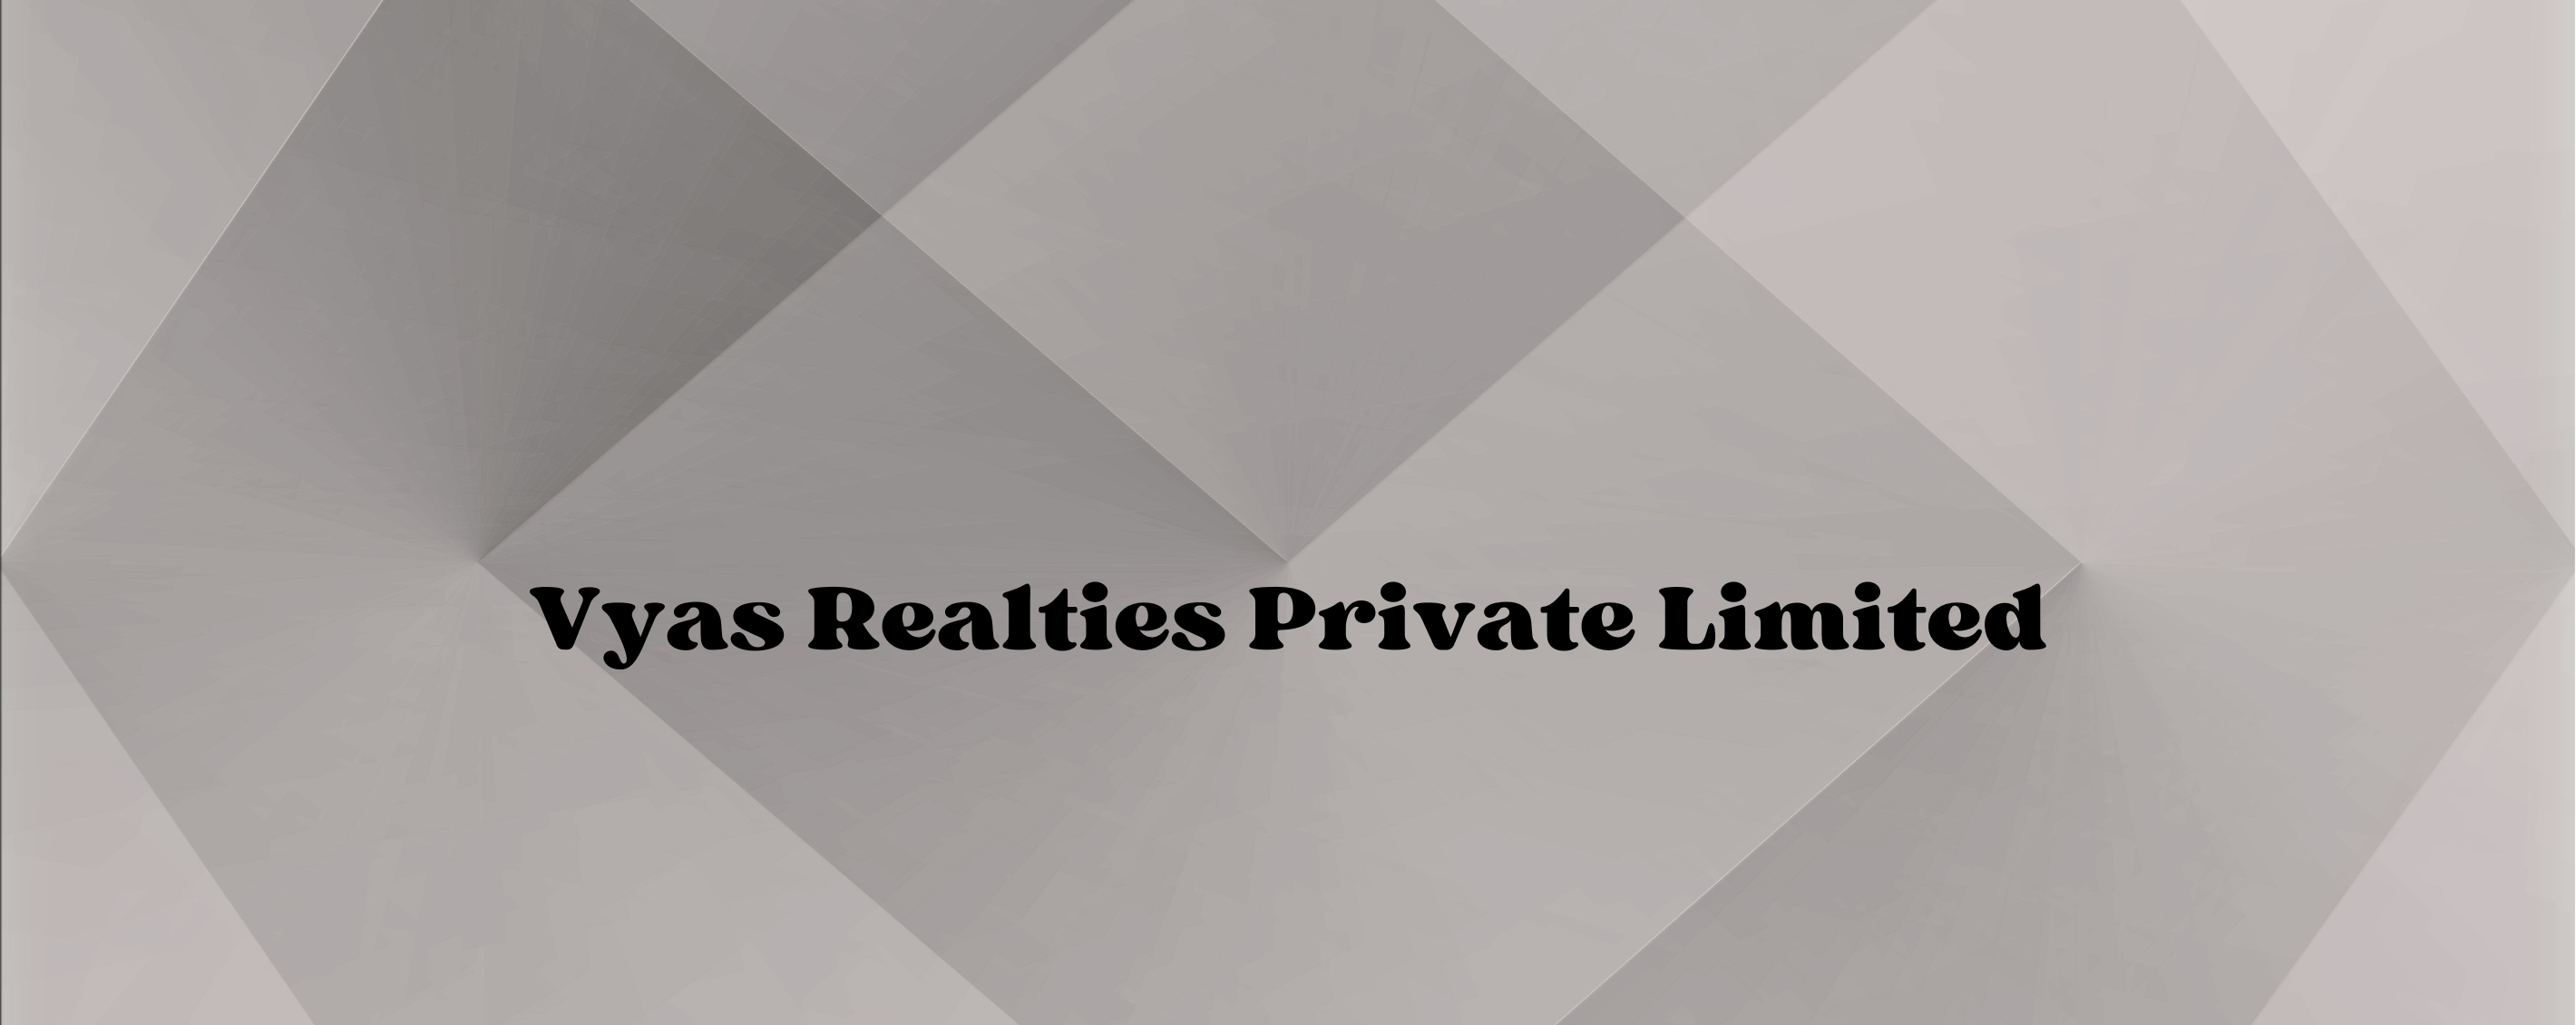 Vyas Realties Private Limited